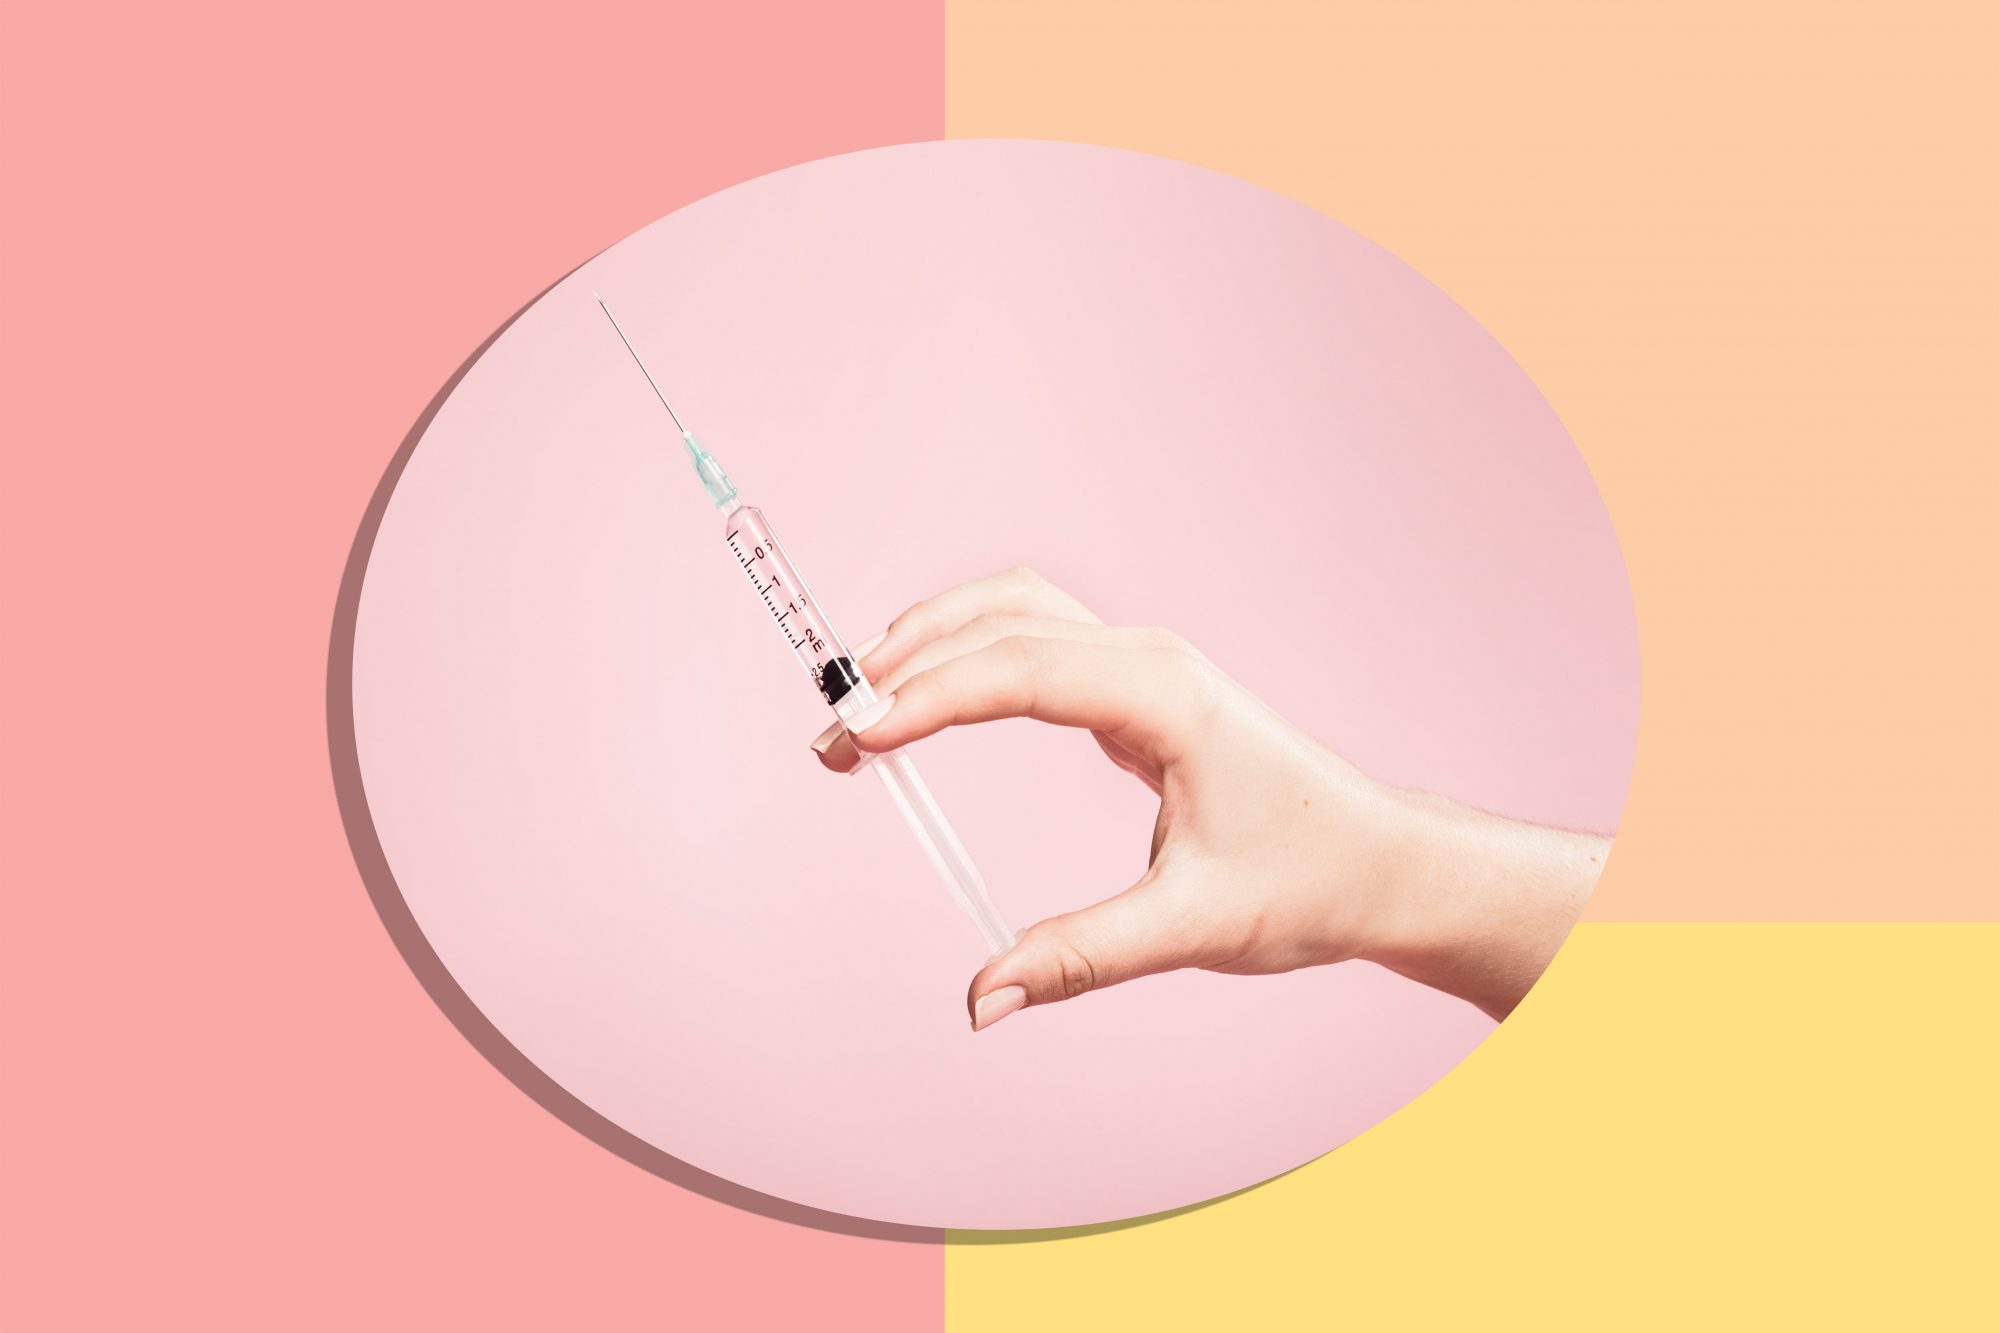 An image of a syringe on a colored background.